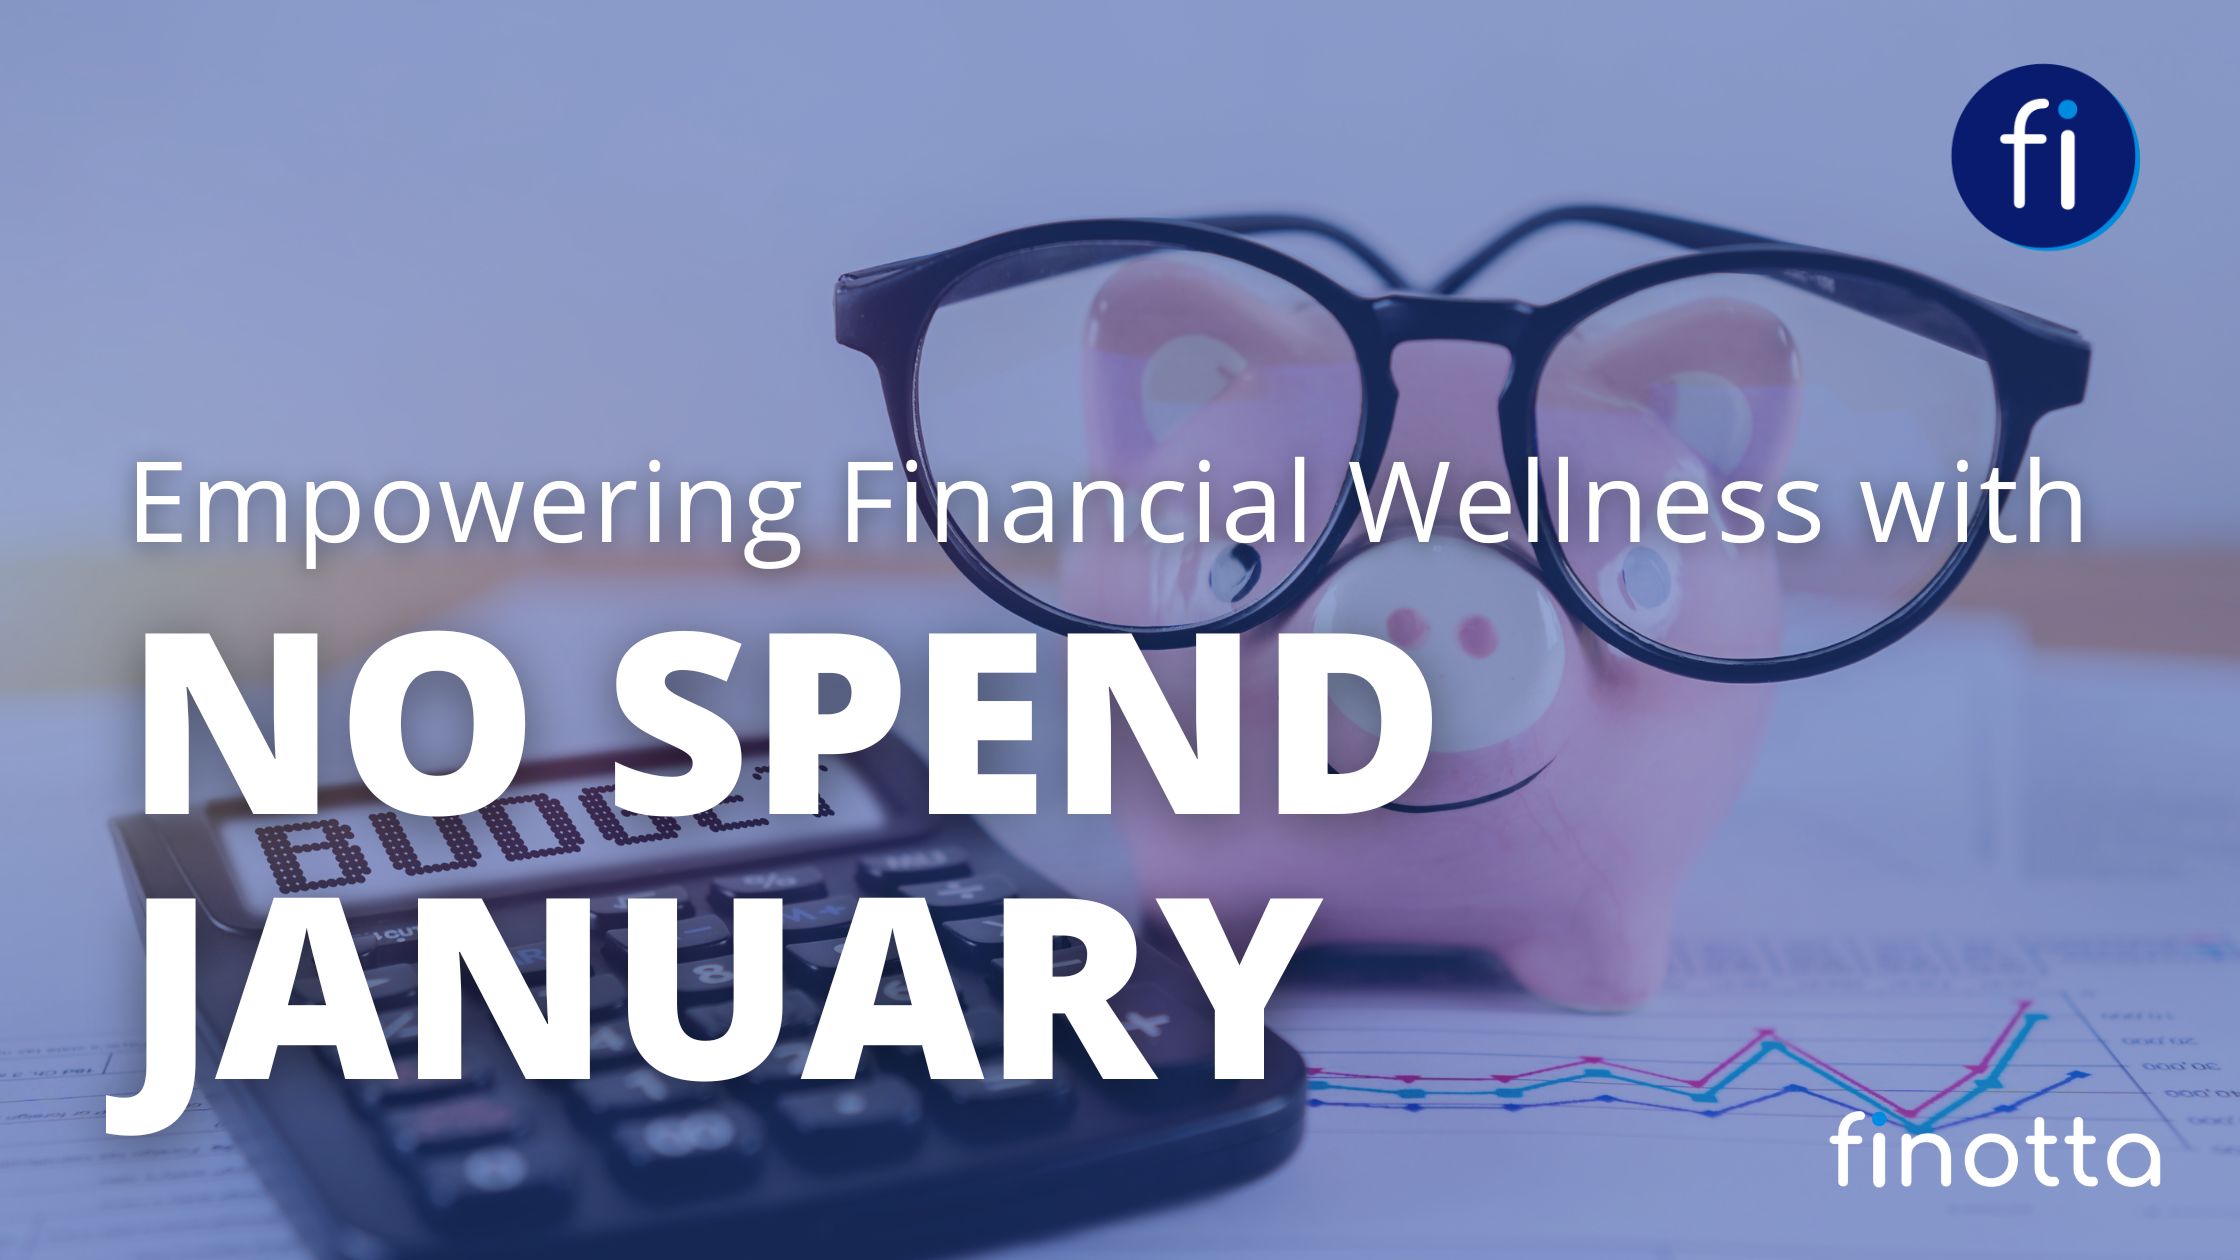 Empowering Financial Wellness with 'No Spend January'